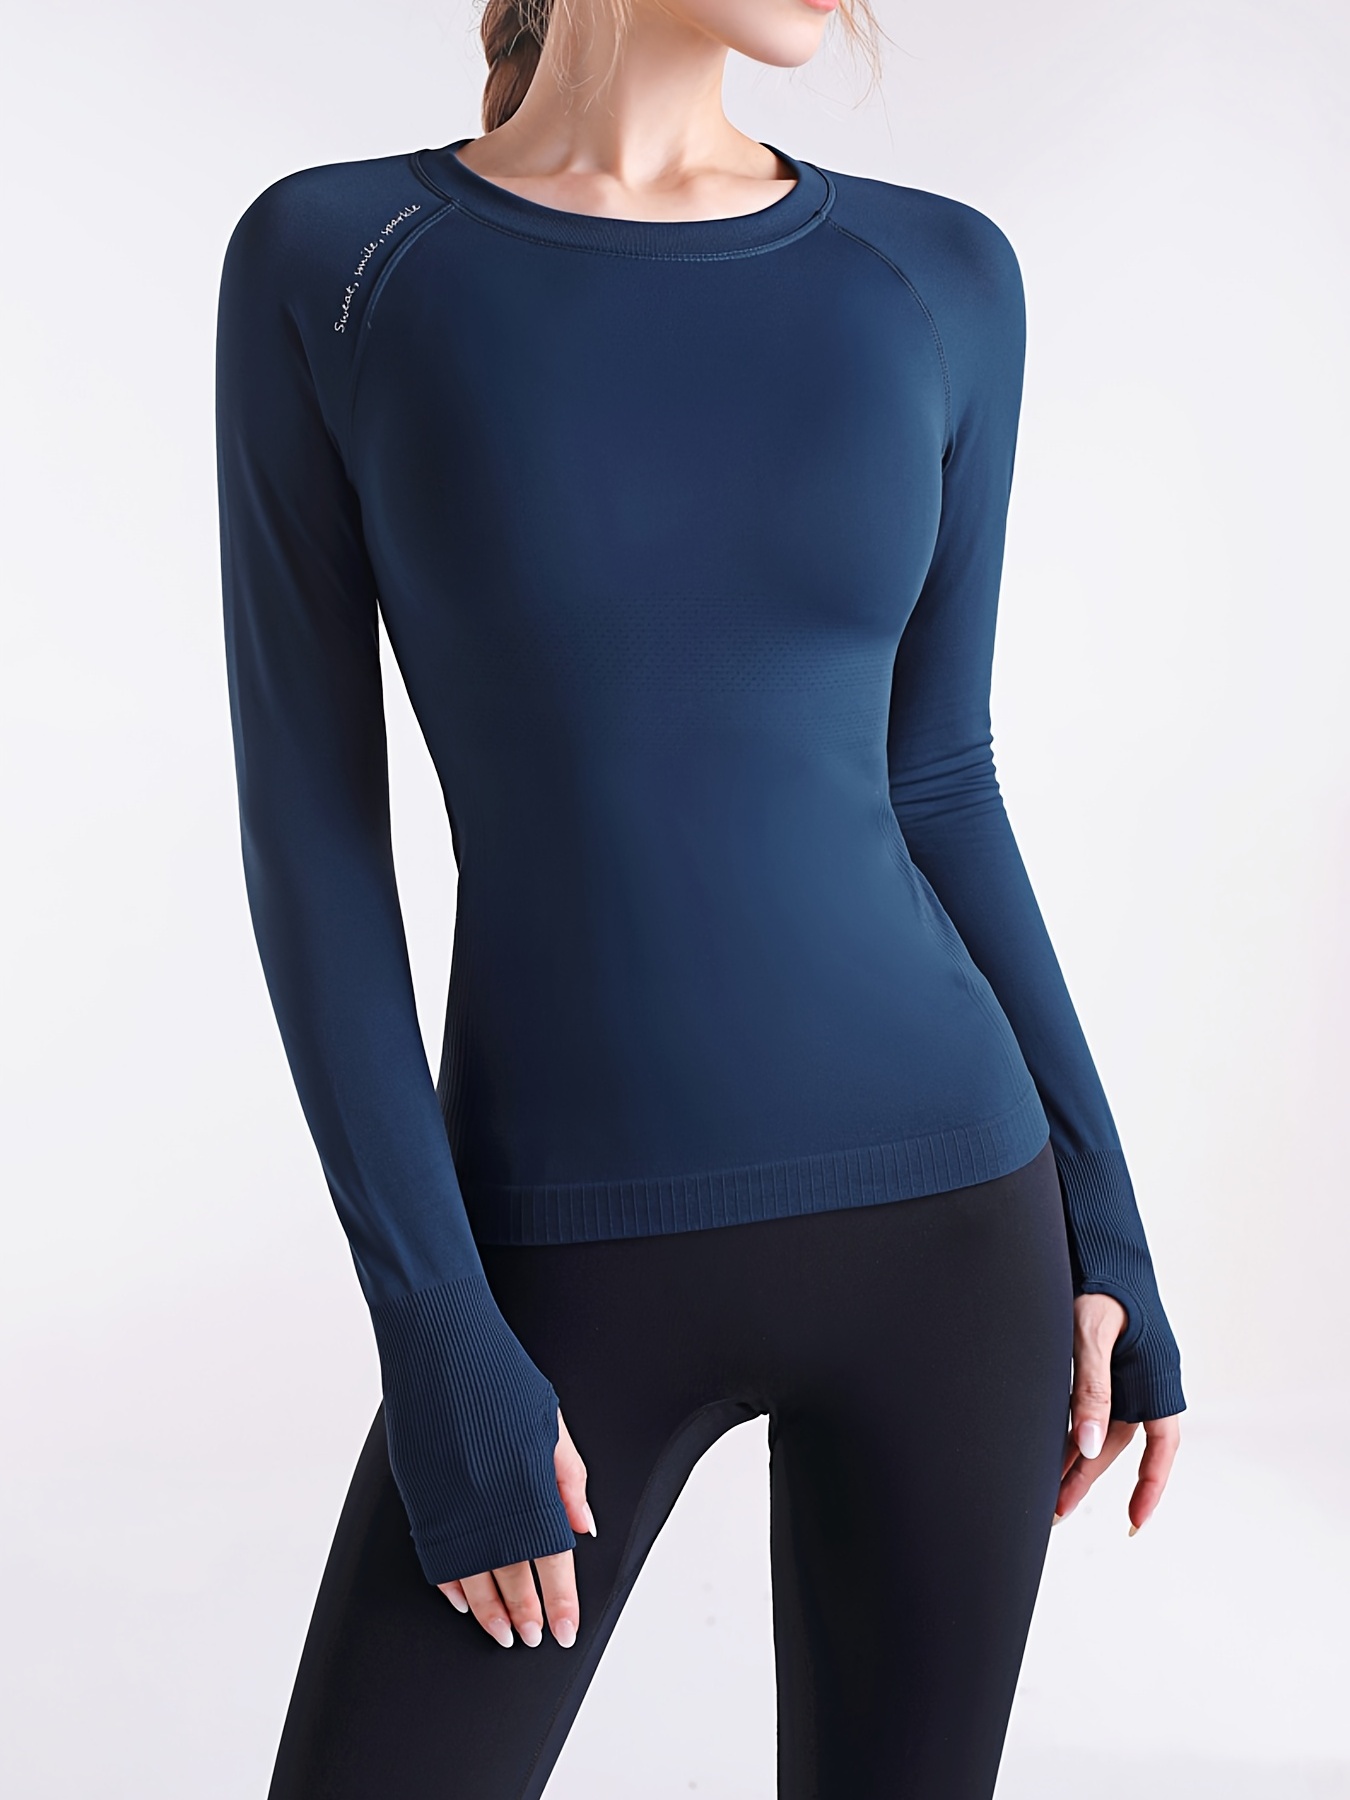 Buy Long Sleeves Yoga Tops For Women Backless Sports T-shirts Gym